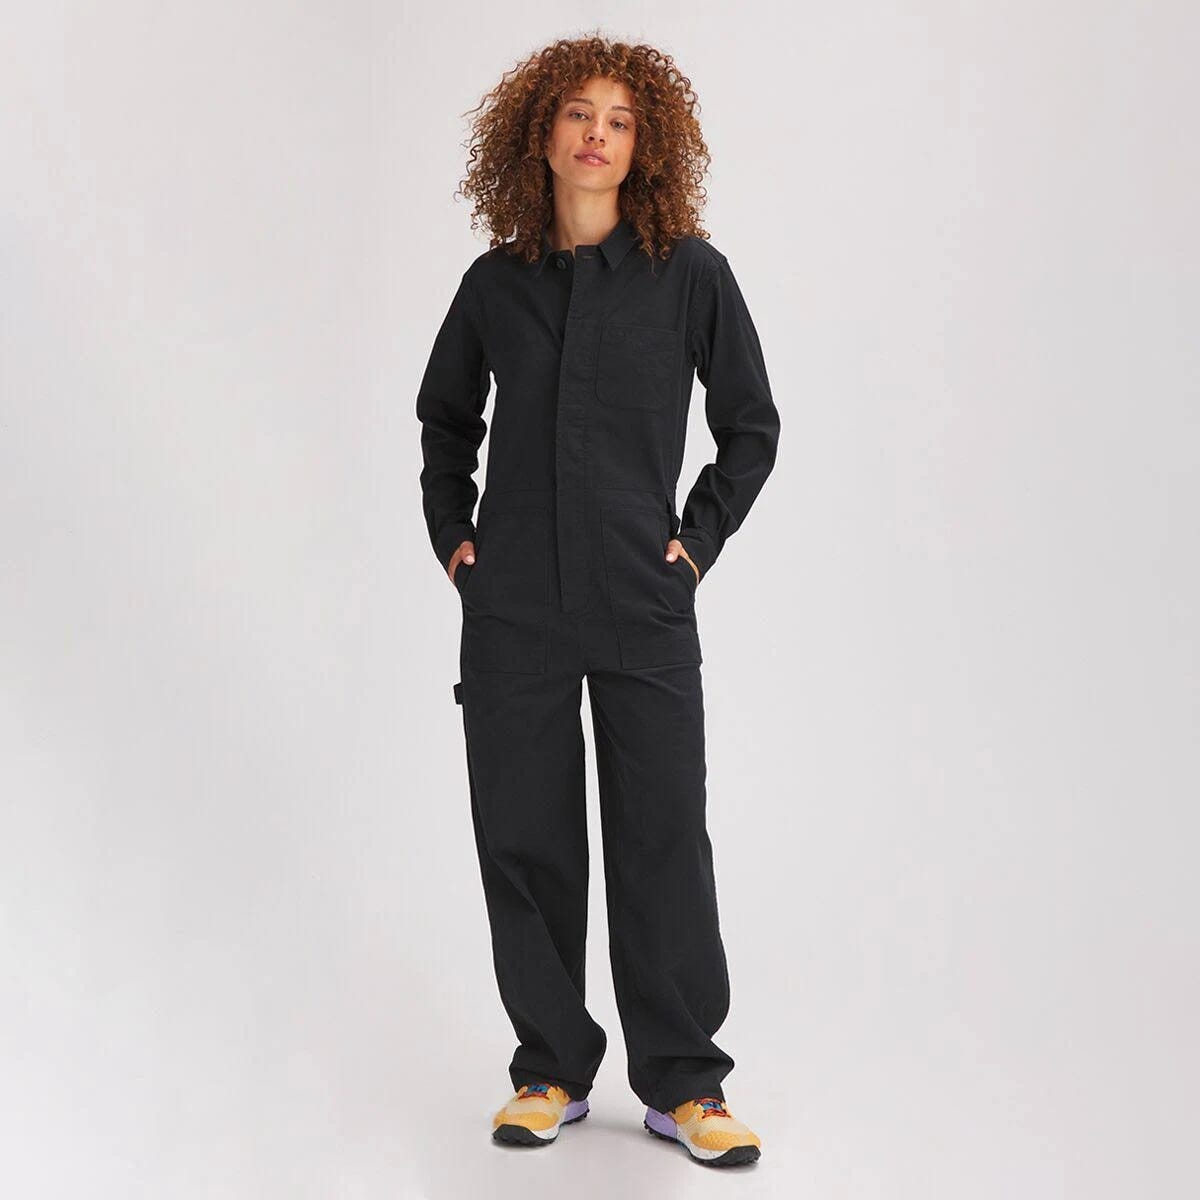 Stylish Long-Sleeve Jumpsuit with Cotton and Spandex Flexibility | Image